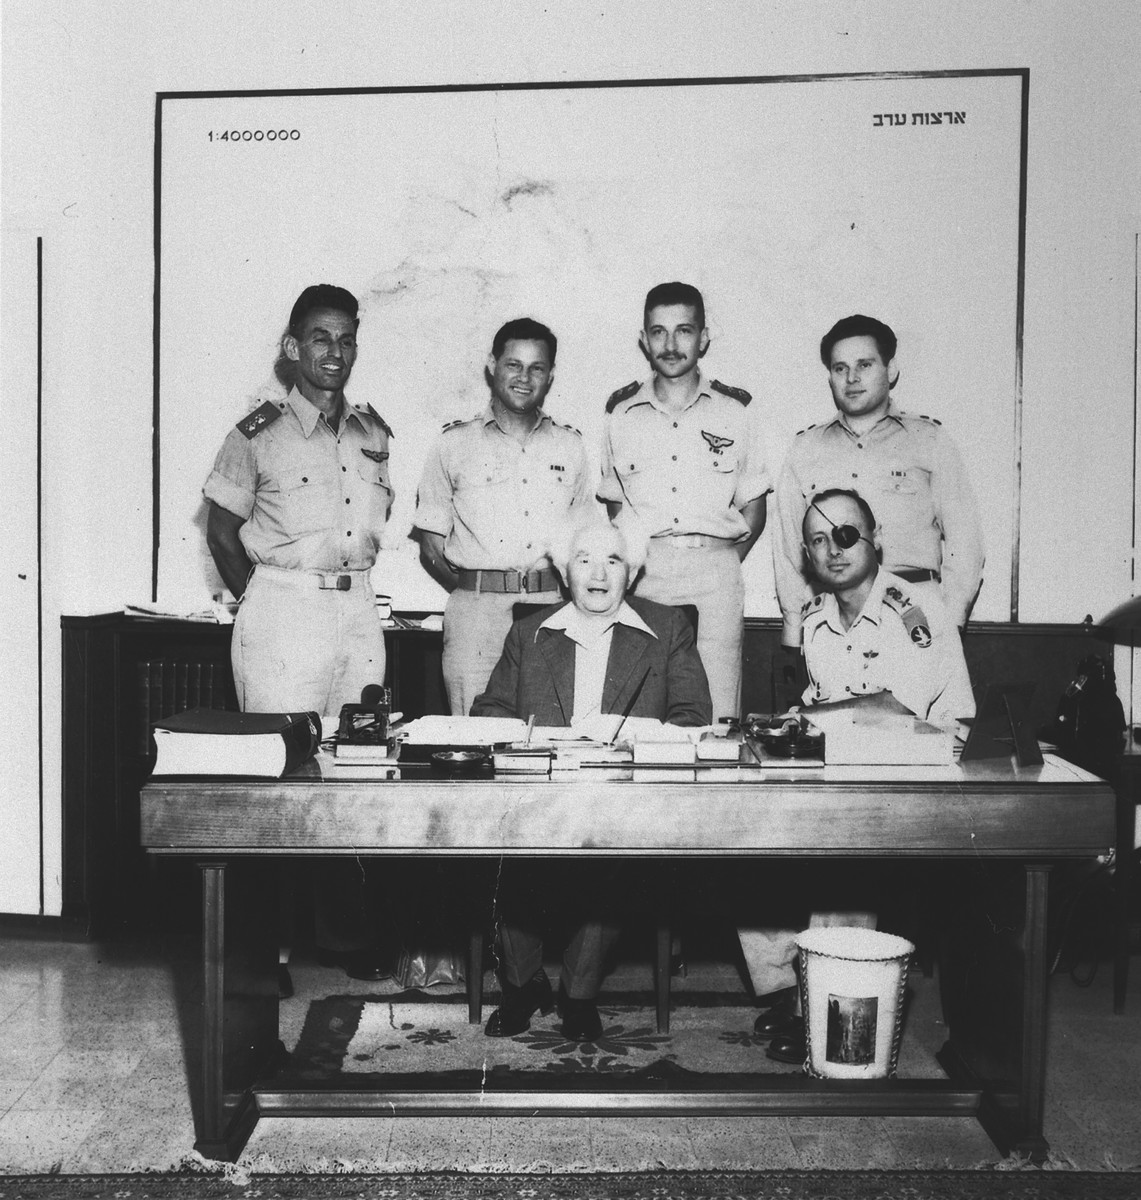 Prime Minister David Ben-Gurion and General Moshe Dayan pose with members of the Israeli Armed Forces.

Standing from left to right are Geda Shochet, Yossi Harel, Ezer Weizman and Nachman Karni, spokesman for the Israeli Defense Force from 1952-1954.